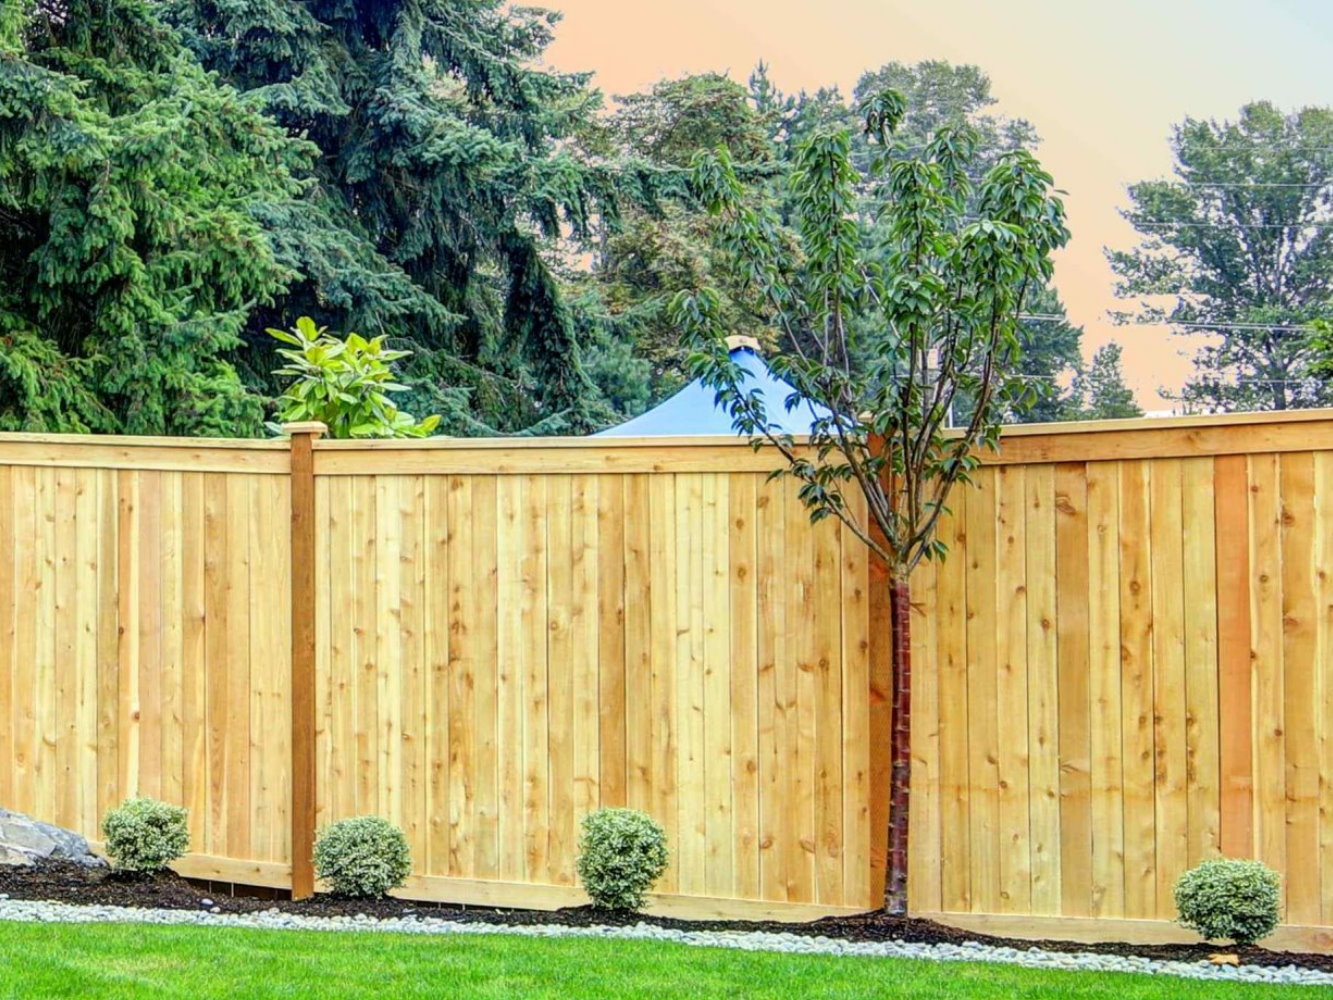 Cameron SC cap and trim style wood fence